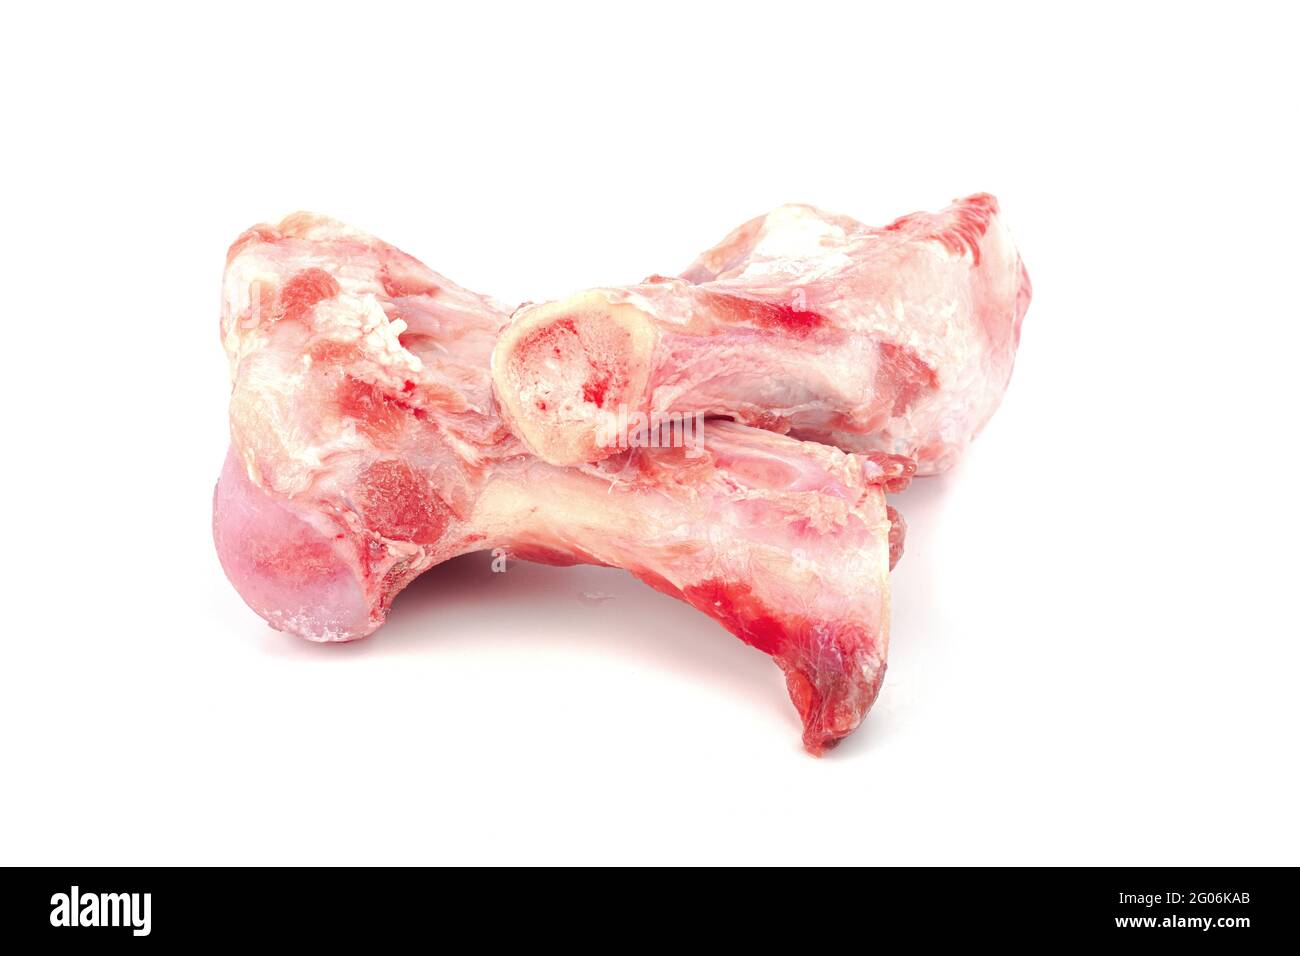 Close up frozen fresh pork bones with red meat stuck To be used for making  pork bone broth on a white background Stock Photo - Alamy